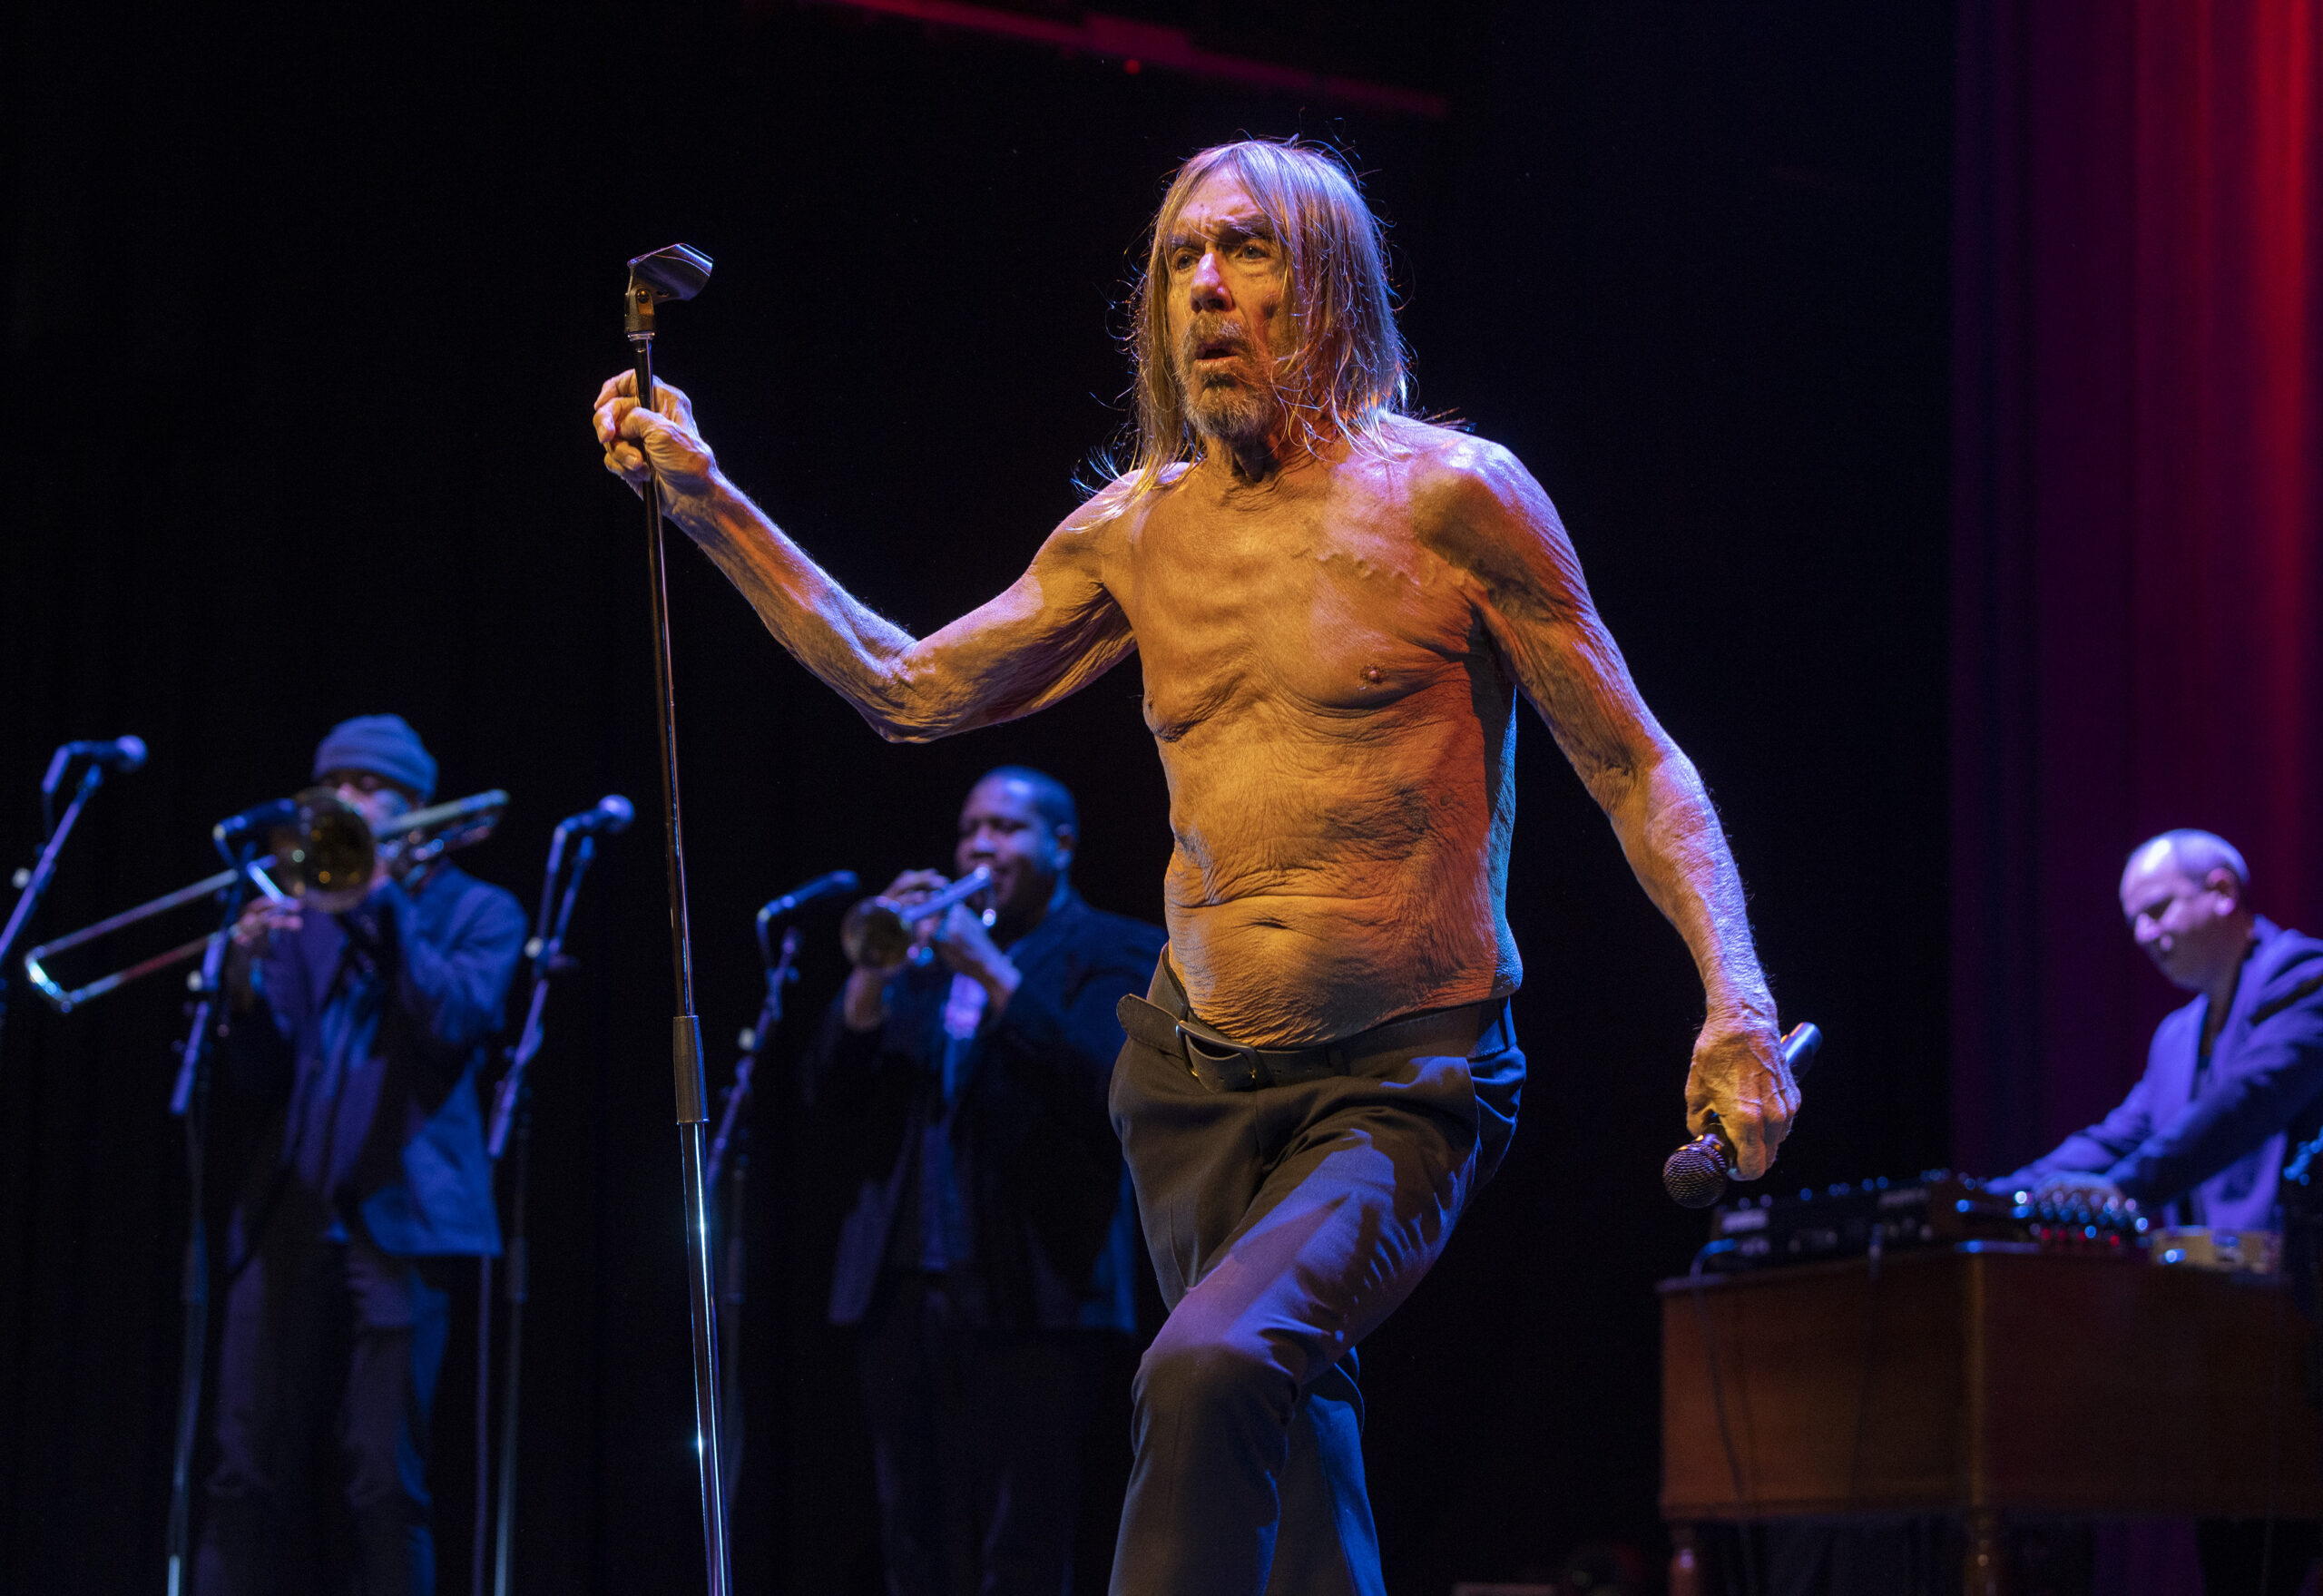 Watch Iggy Pop Cover Lou Reed's 'Walk On The Wild Side' For The First